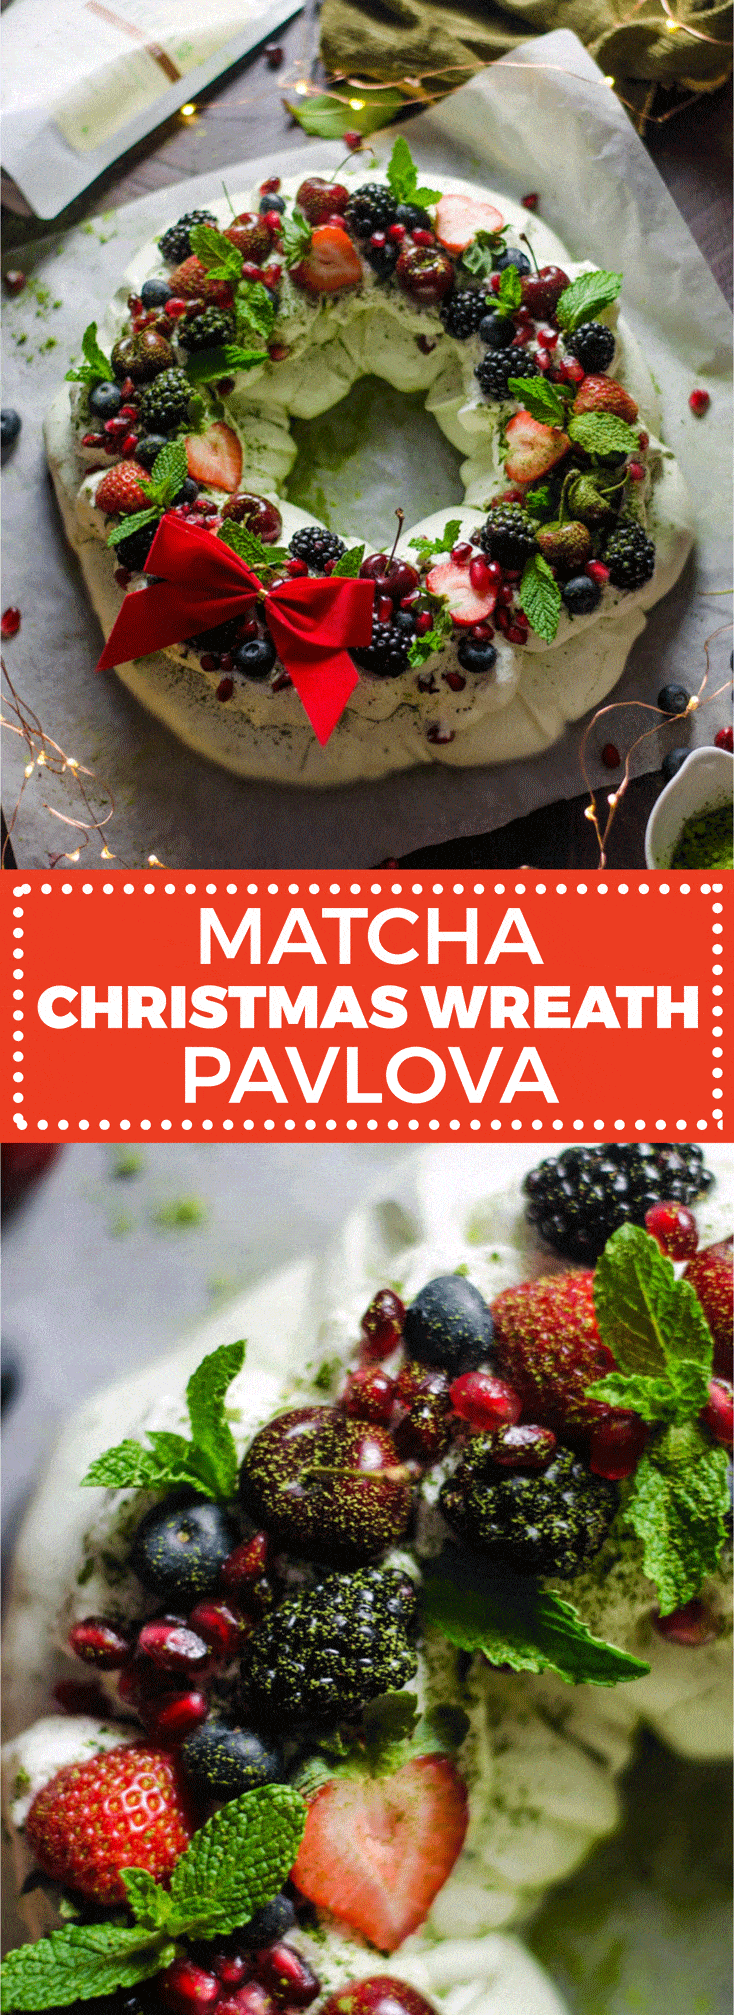 Matcha Christmas Wreath Pavlova. This sweet, smooth, and earthy-flavored dessert features a crisp crust and soft, marshmallowy center. Topped with whipped cream and berries, it is a beautiful addition to your holiday table. | hostthetoast.com